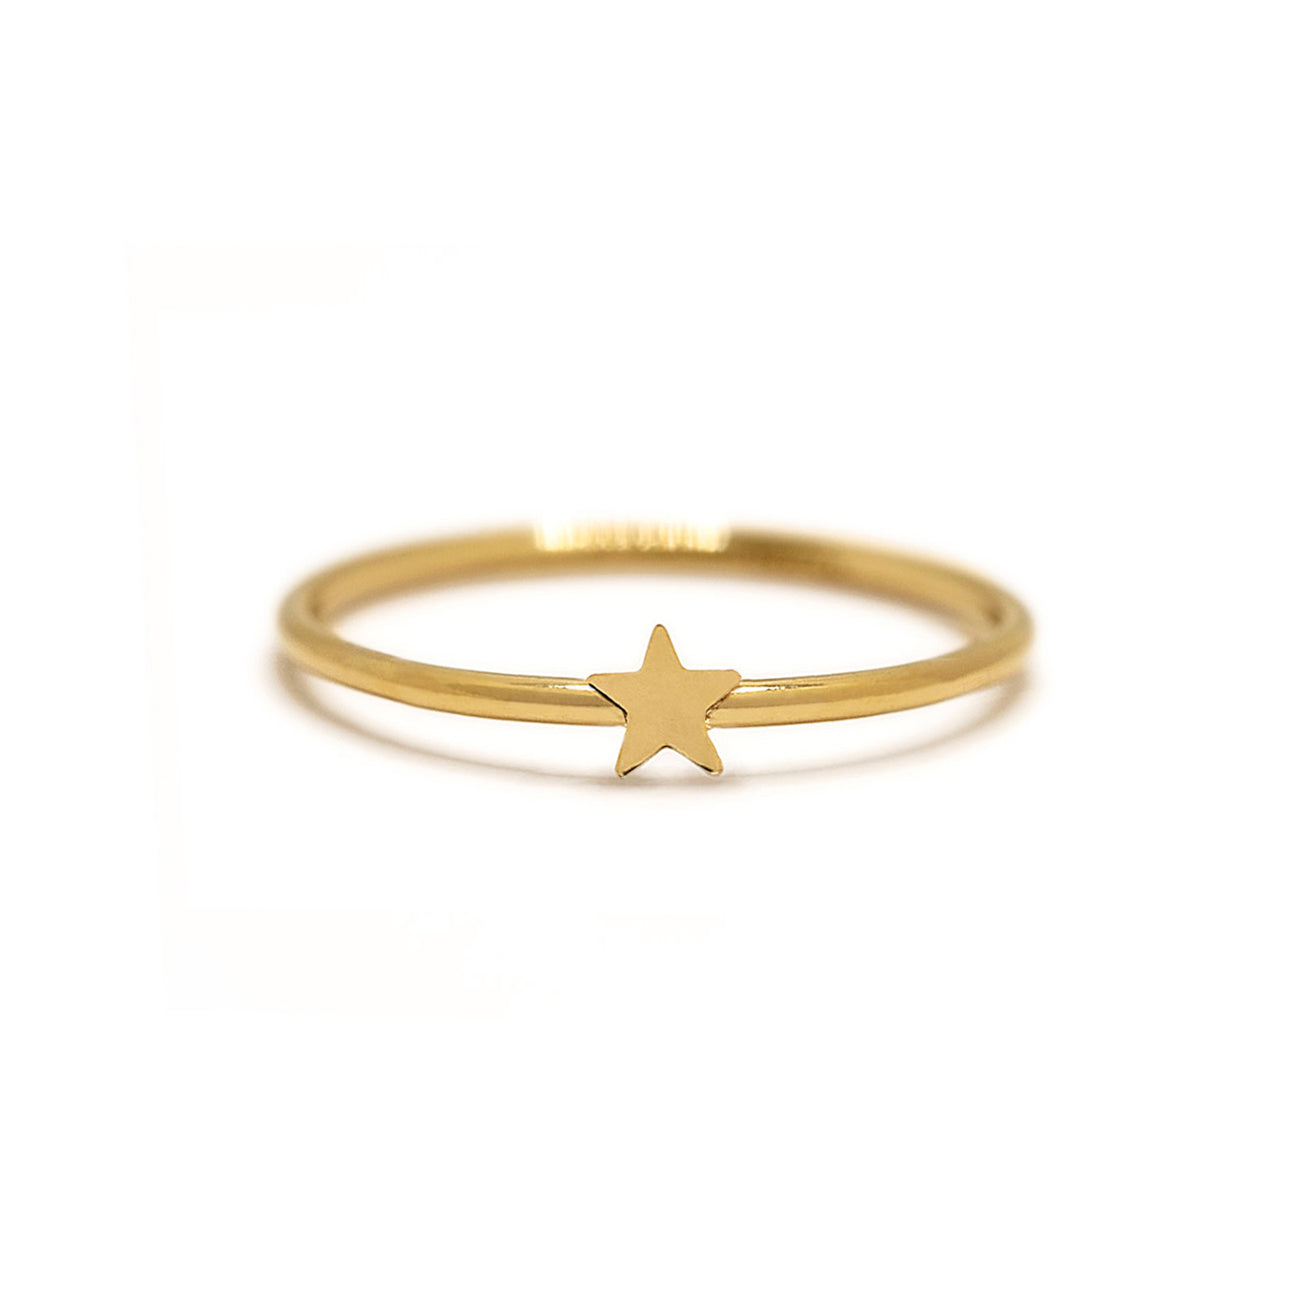 14K Gold Mini Star Ring, Minimal Stackable Ring, Celestial Jewelry, Constellation Ring, Birthday Gift, Simple Gold Ring, Rose Gold